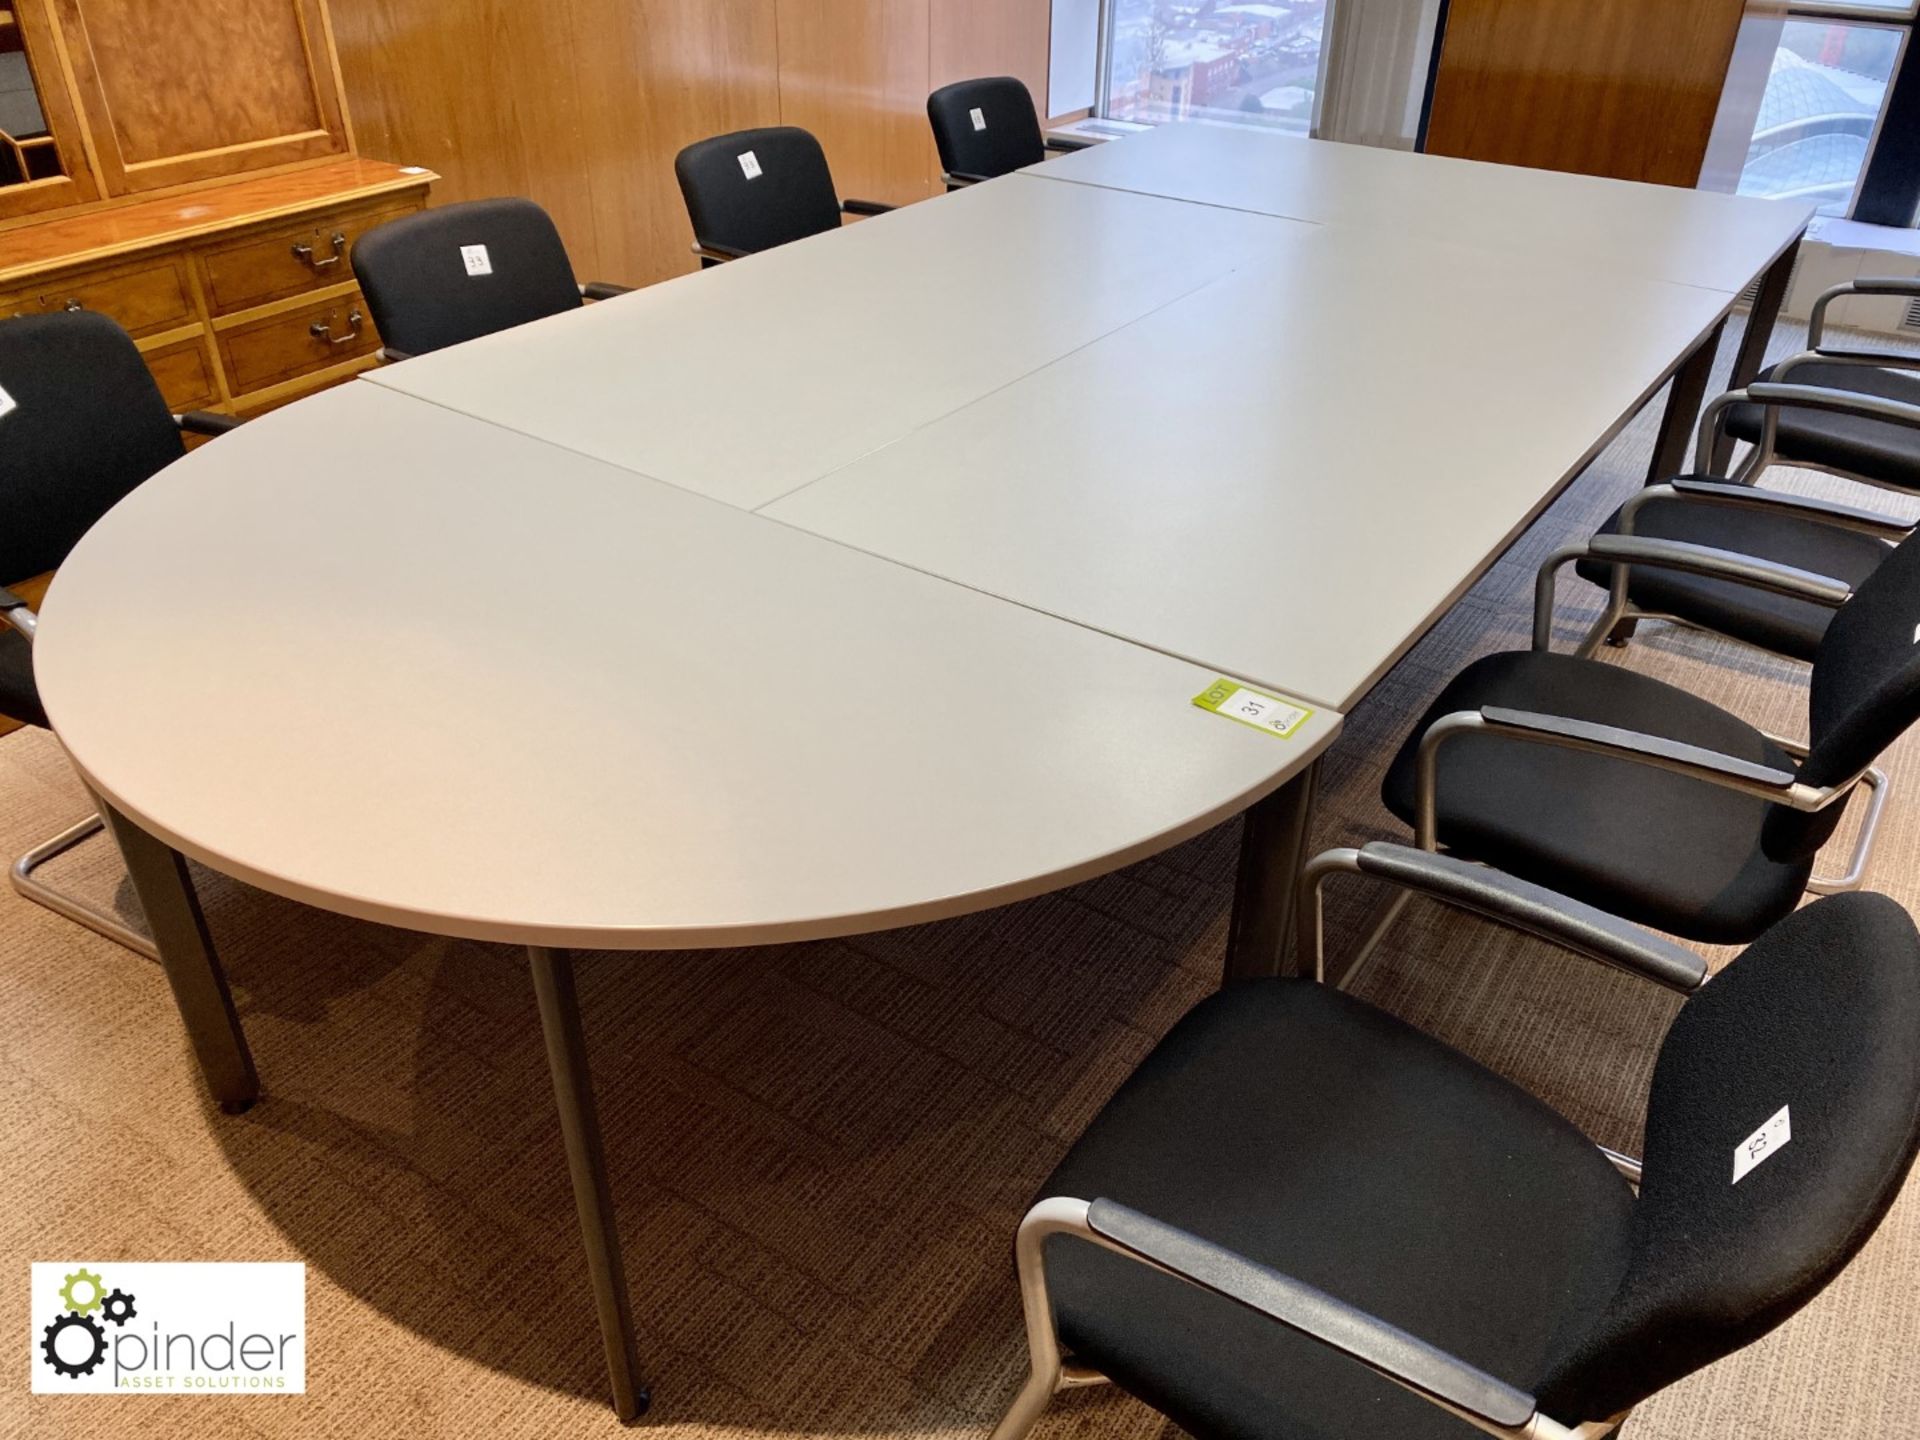 4-piece Meeting Table with curved end, overall length 3400mm x 1600mm (located in Meeting Room 9 - Image 2 of 3